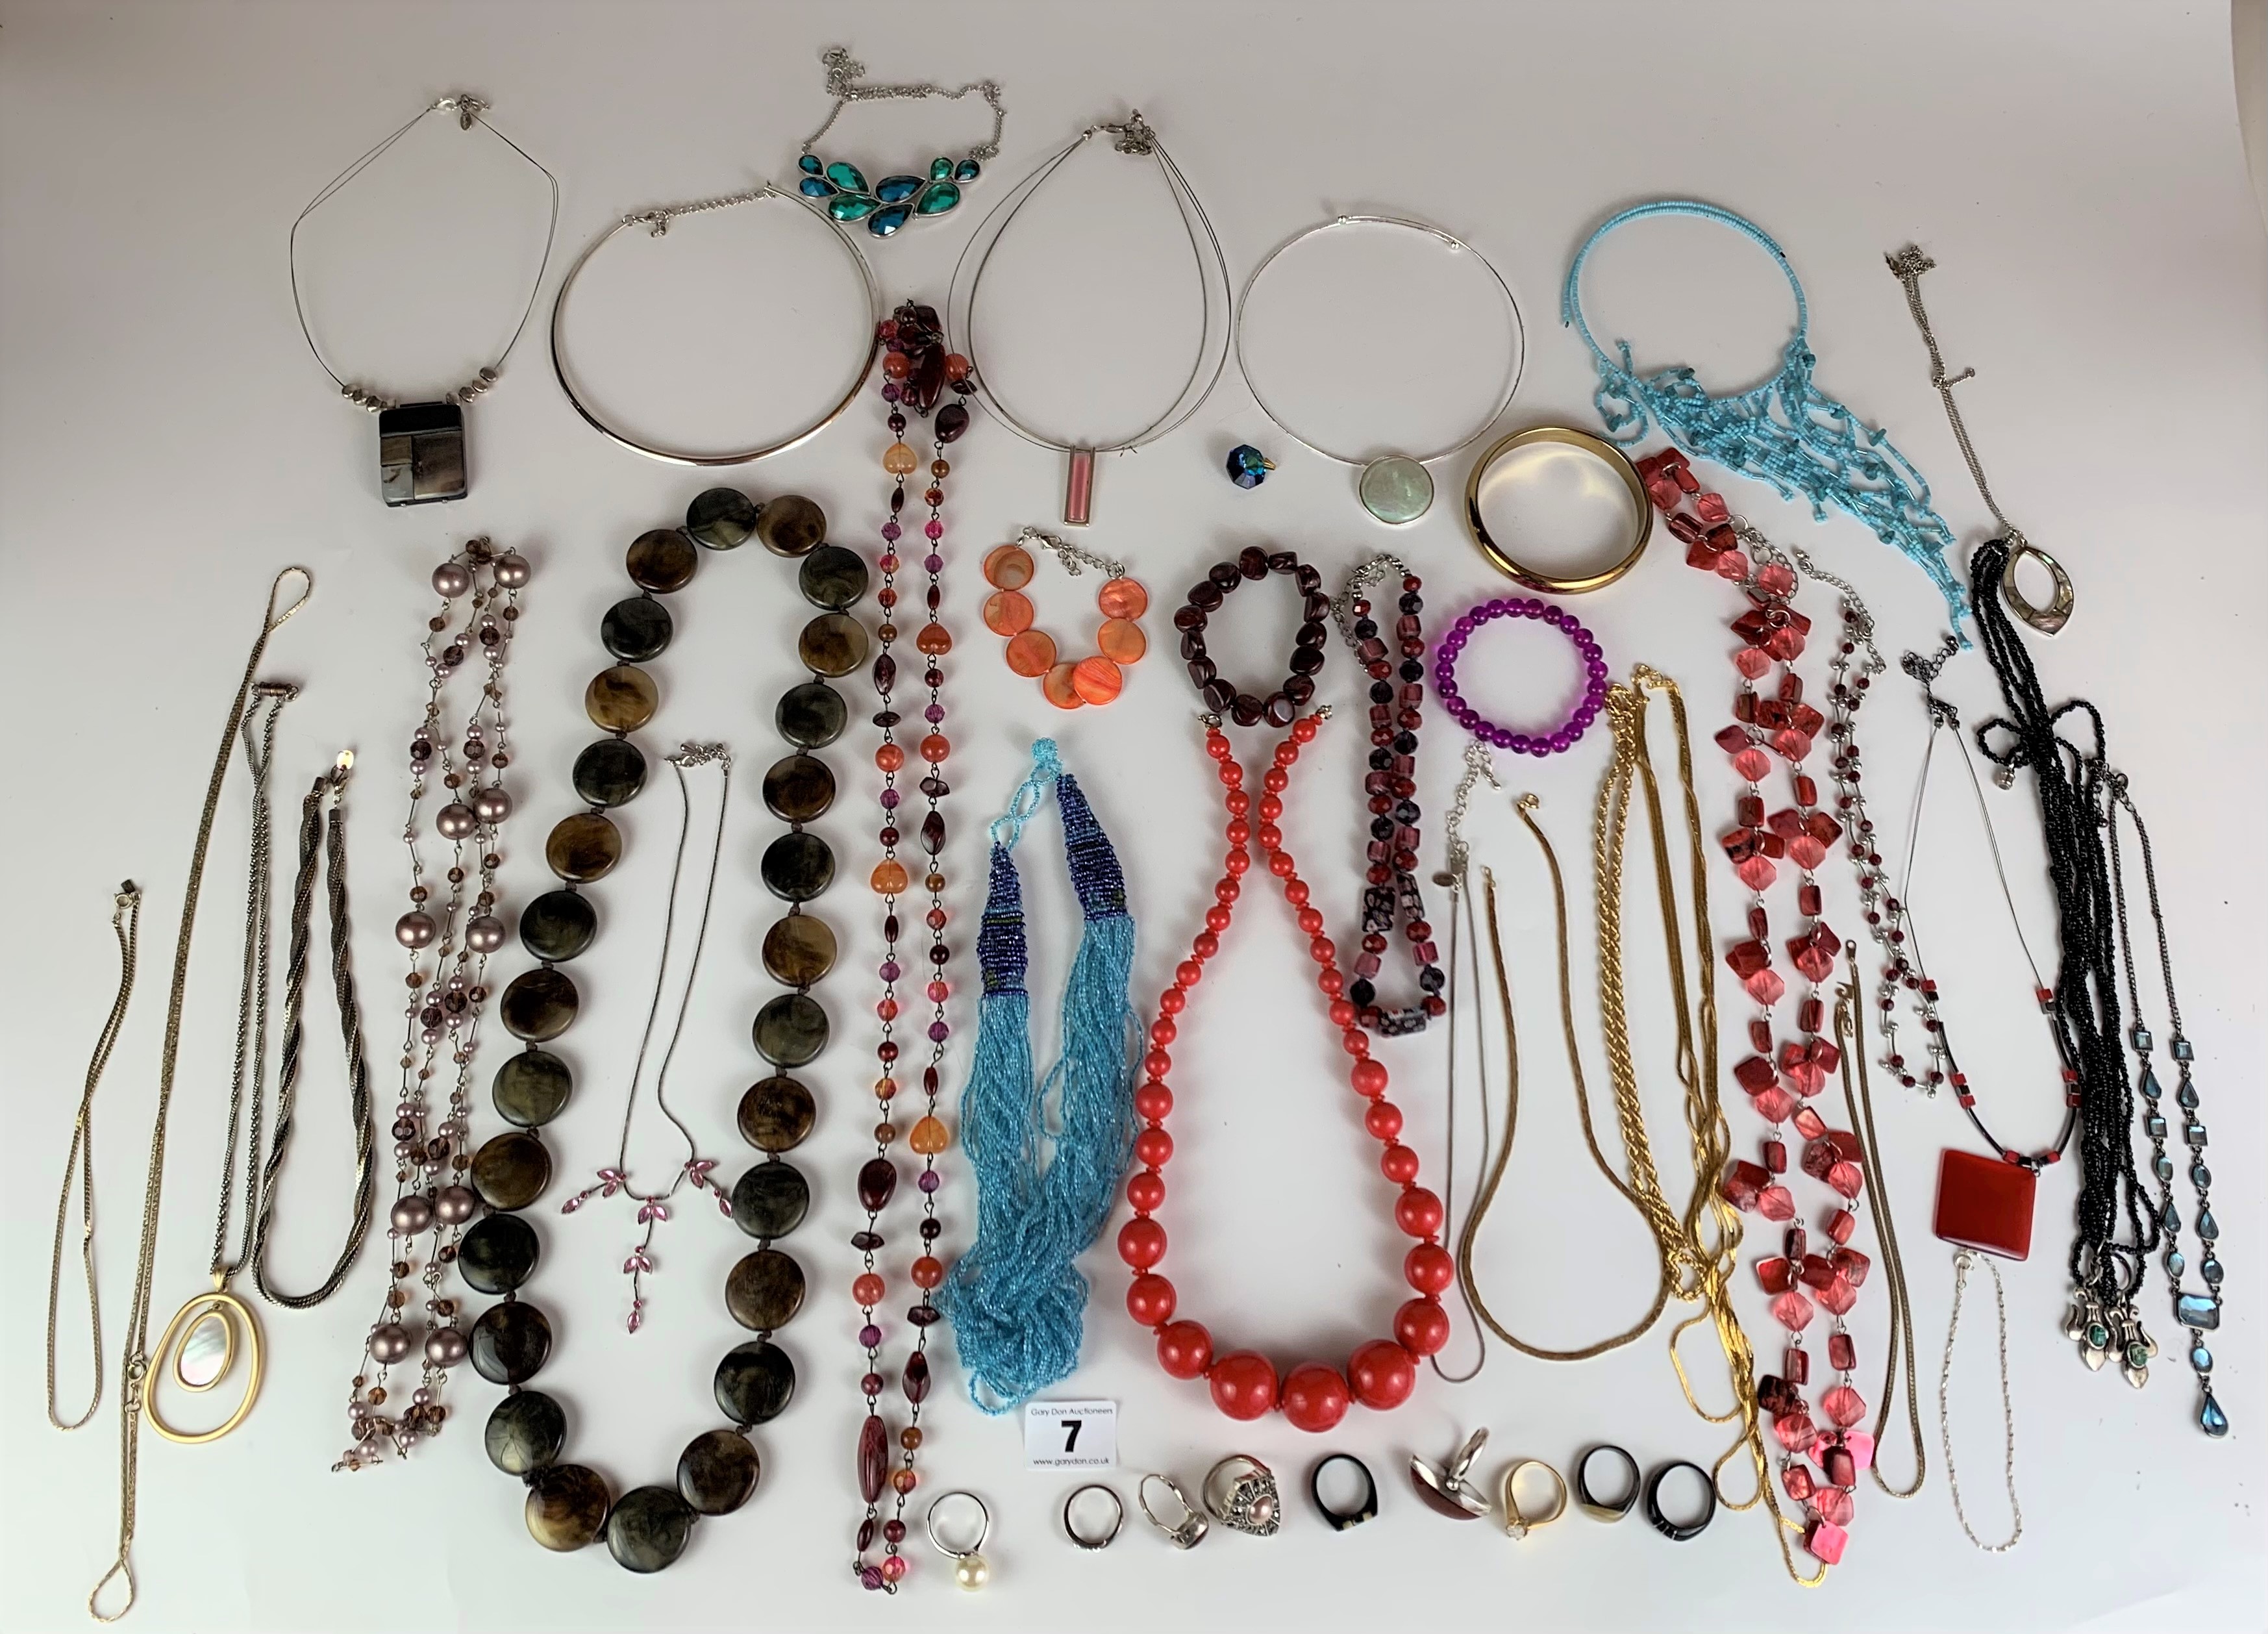 Dress jewellery including necklaces, beads, bracelets, rings etc.